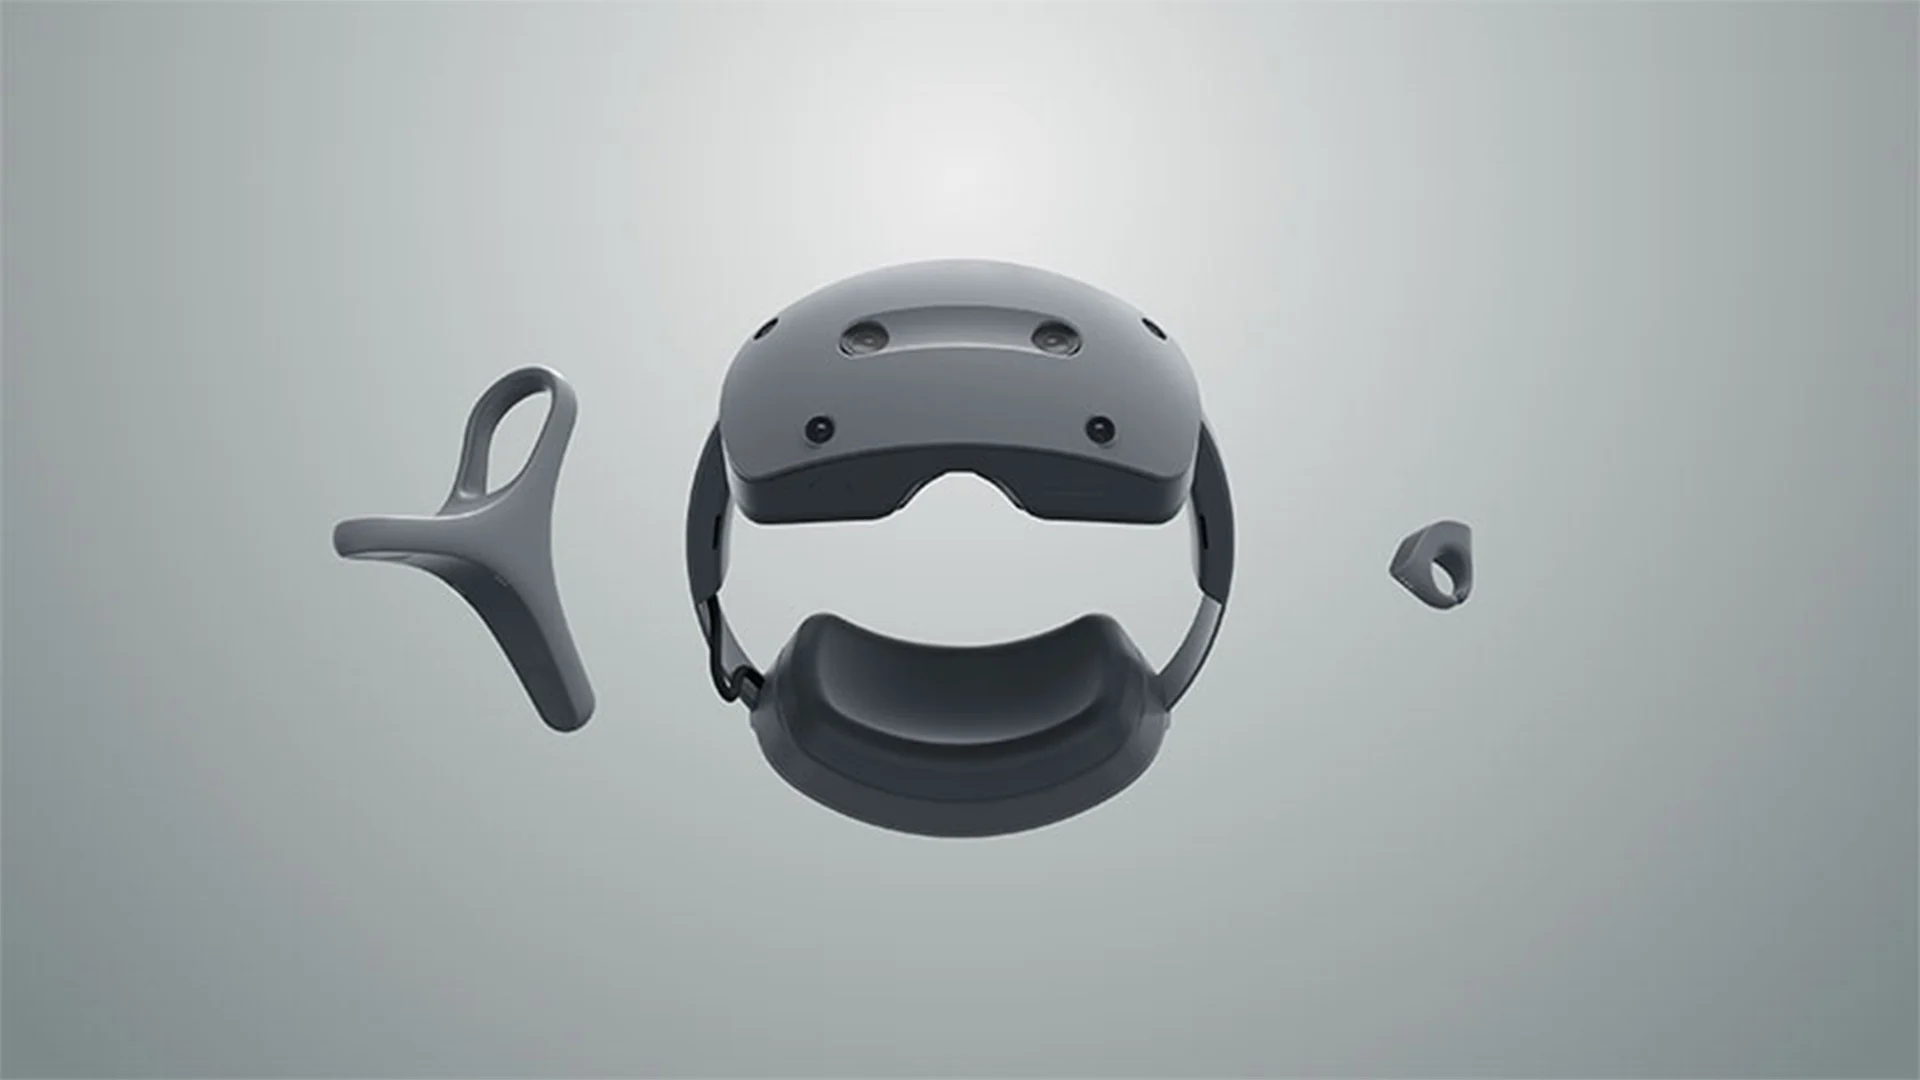 Image of Sony Spatial VR headset